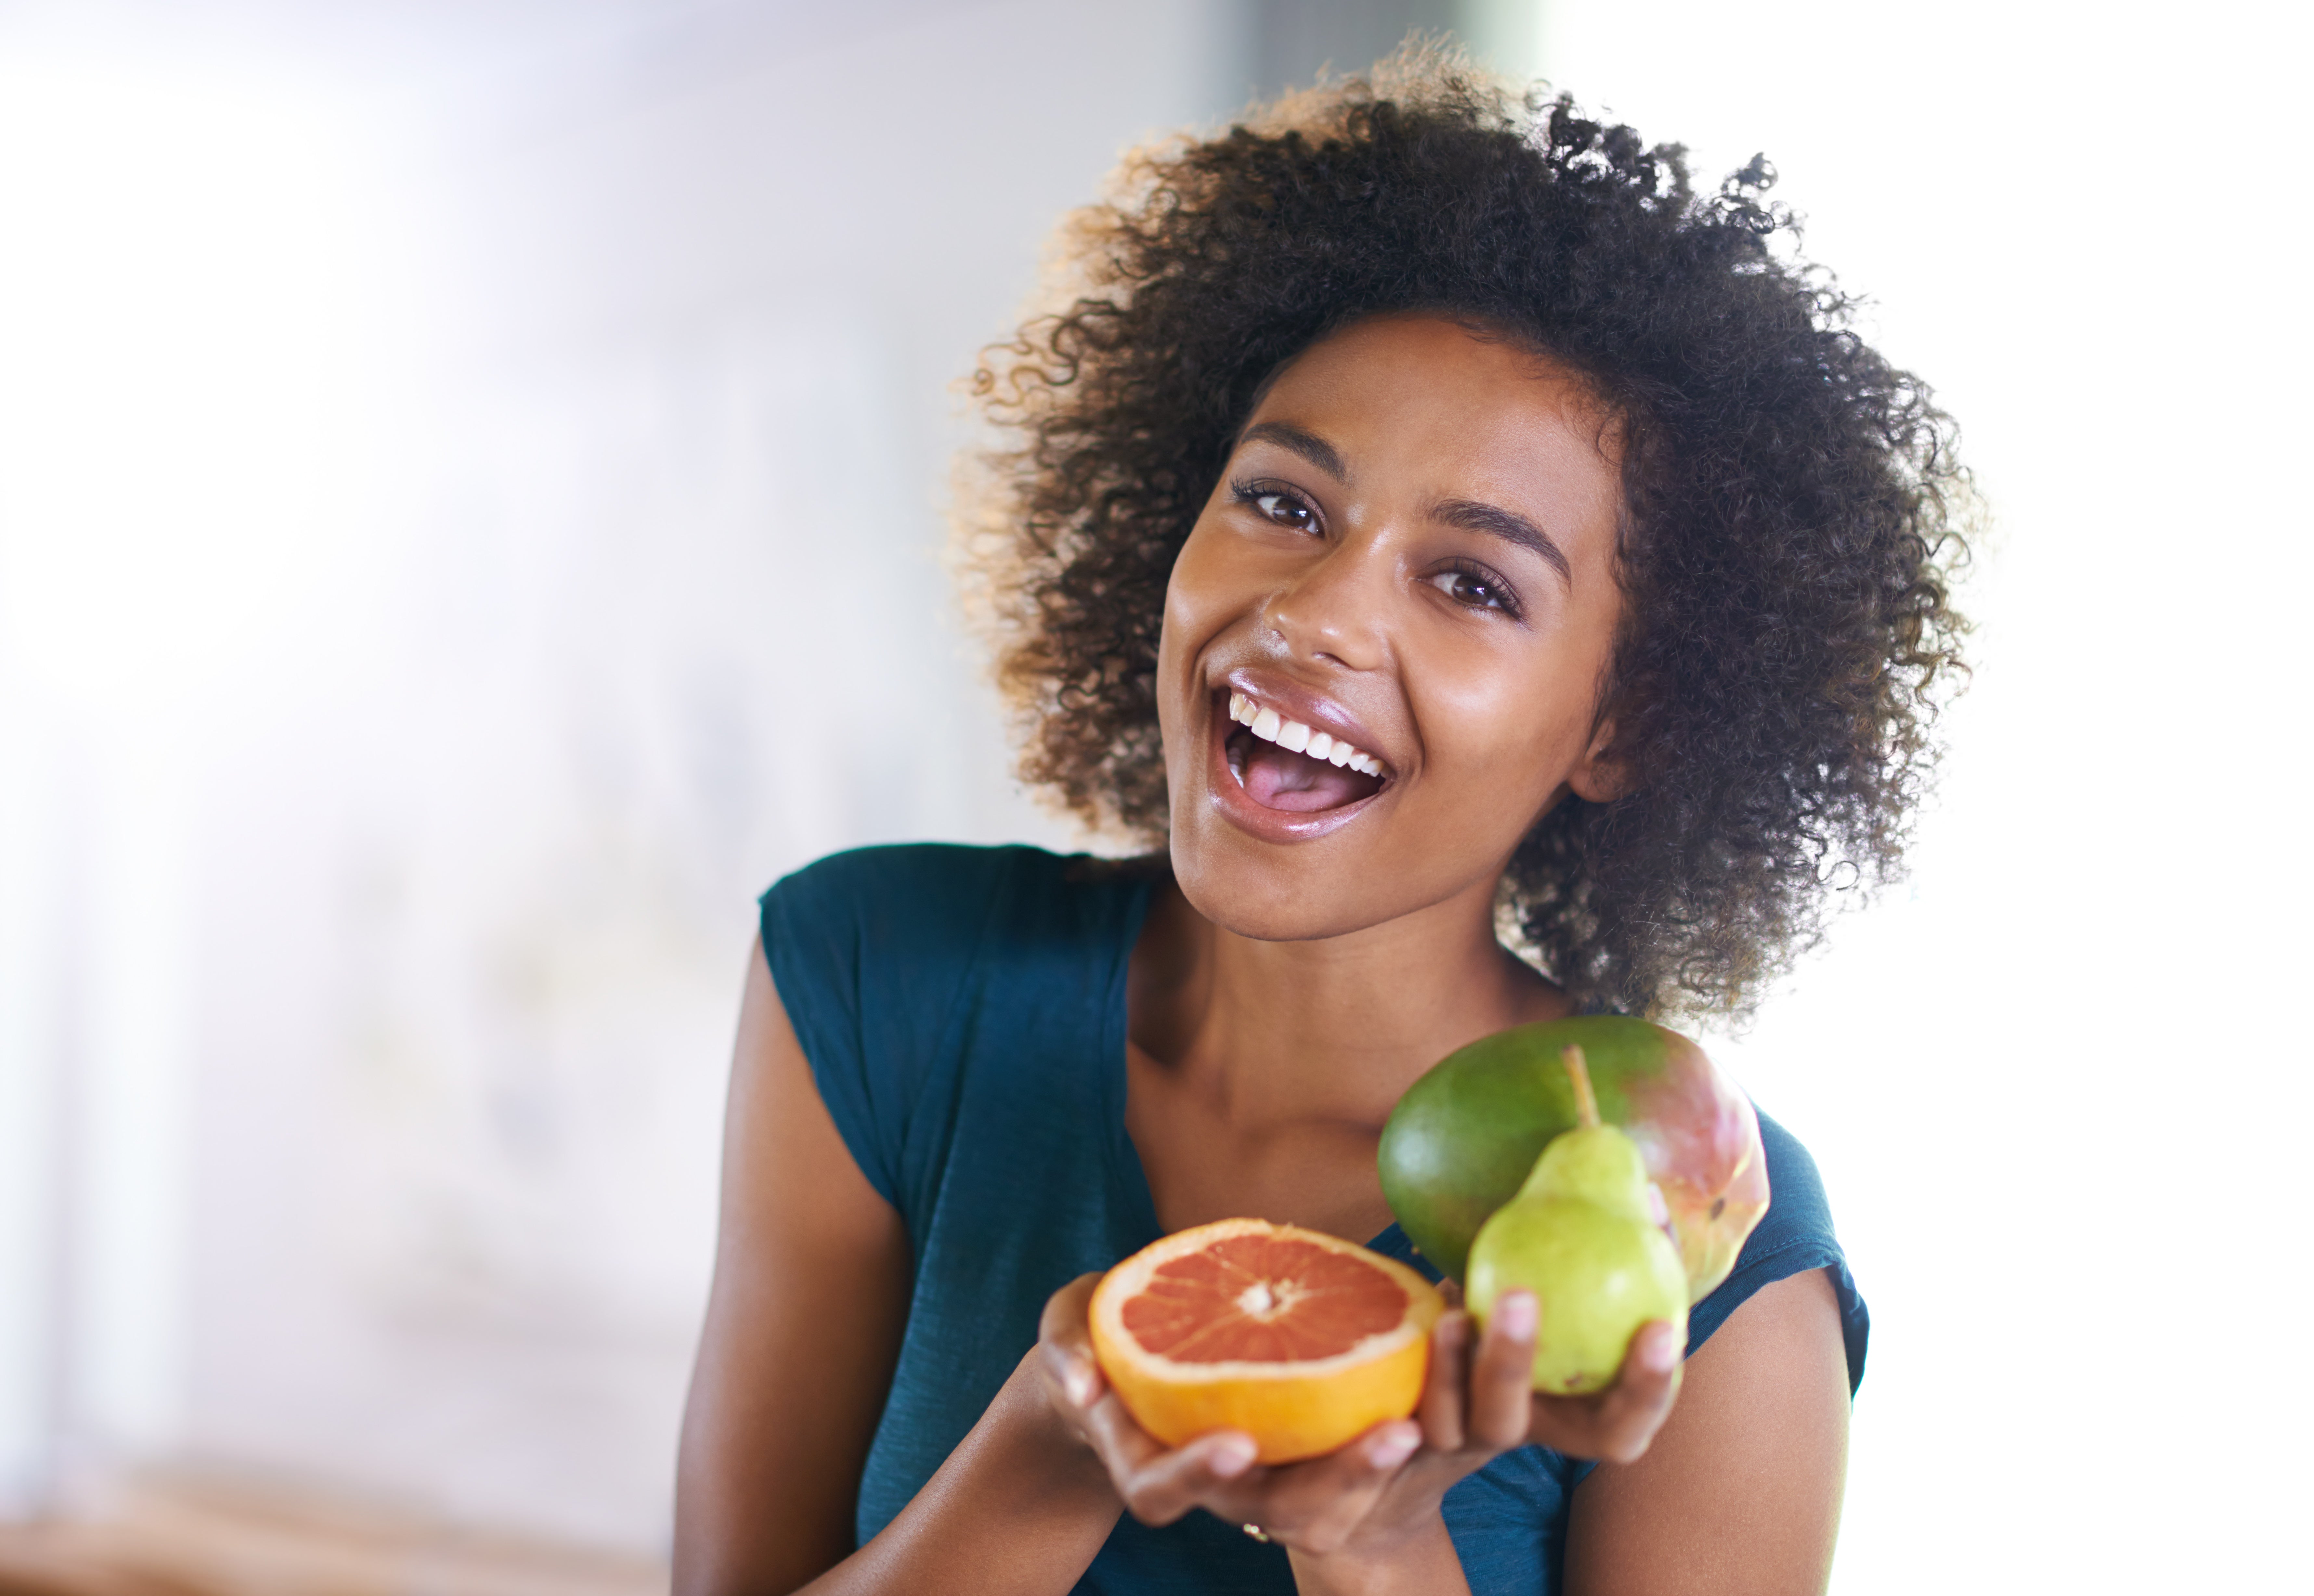 The 7 Best Foods to Eat for Hair Growth, According to an RD | HUM Nutrition  Blog